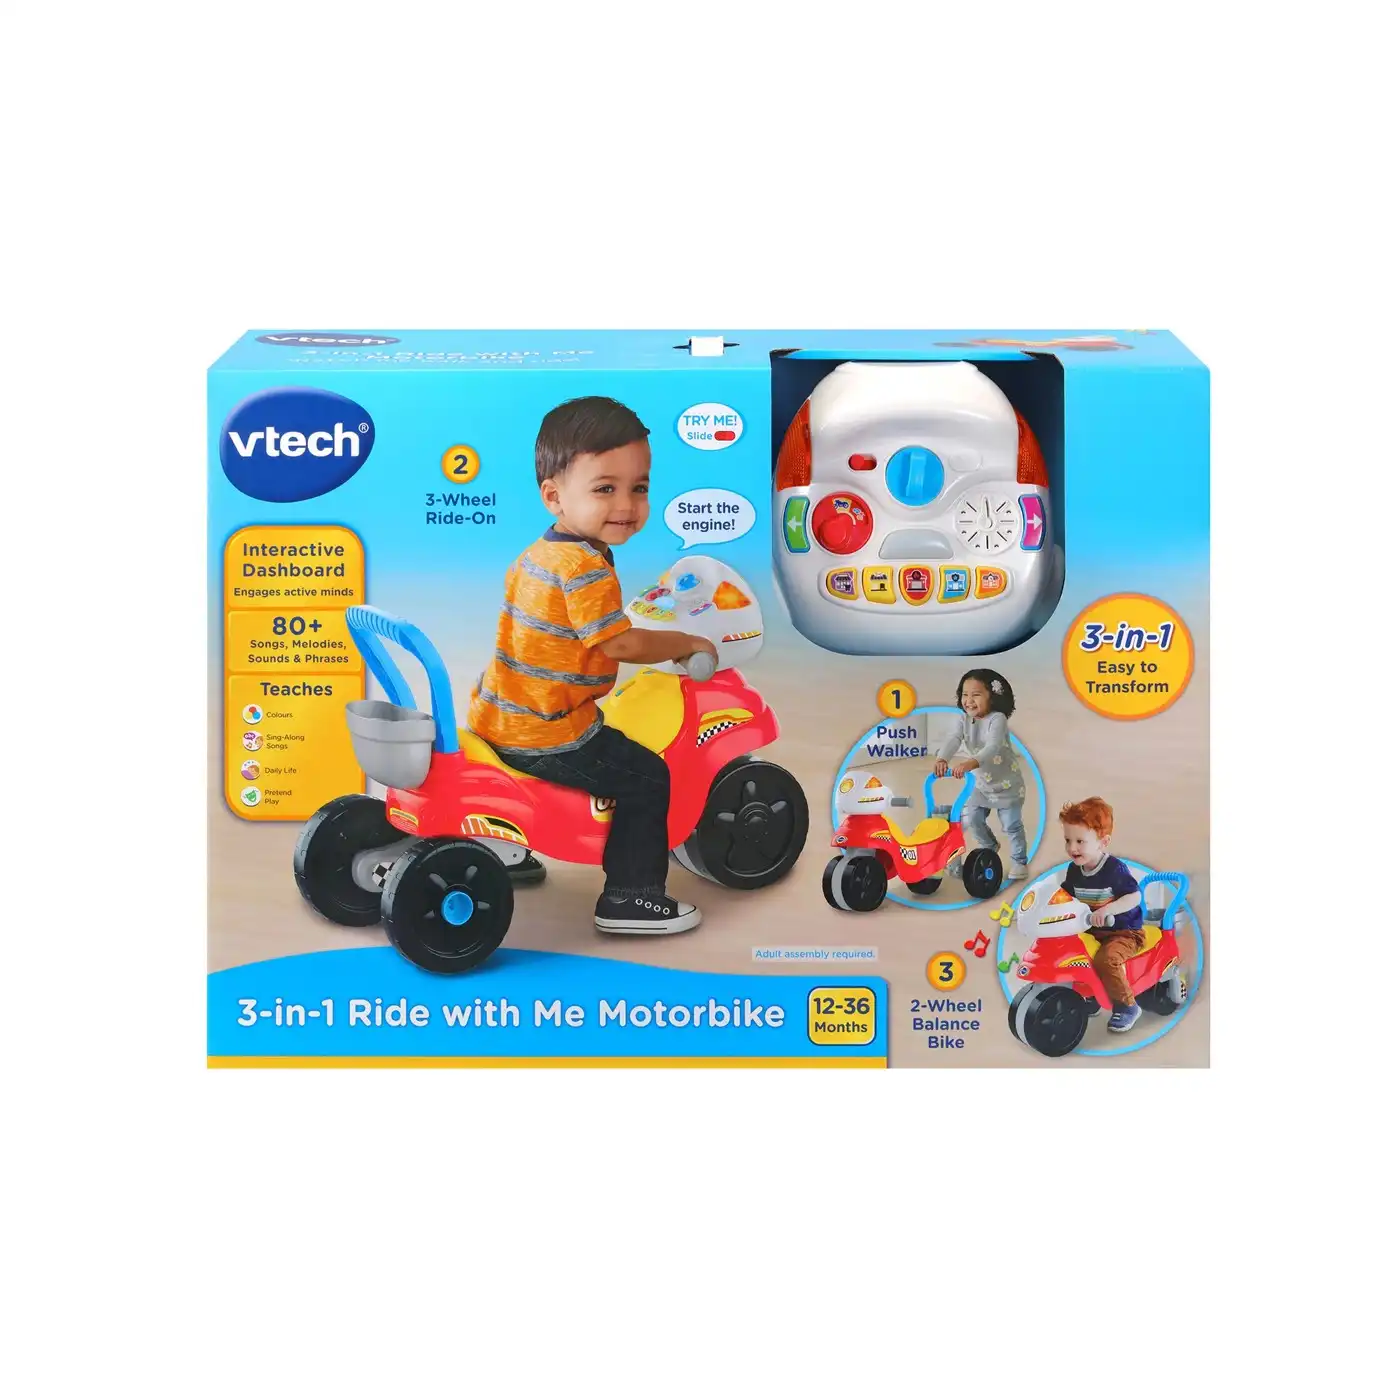 VTech 3-in-1 Ride with Me Motorbike